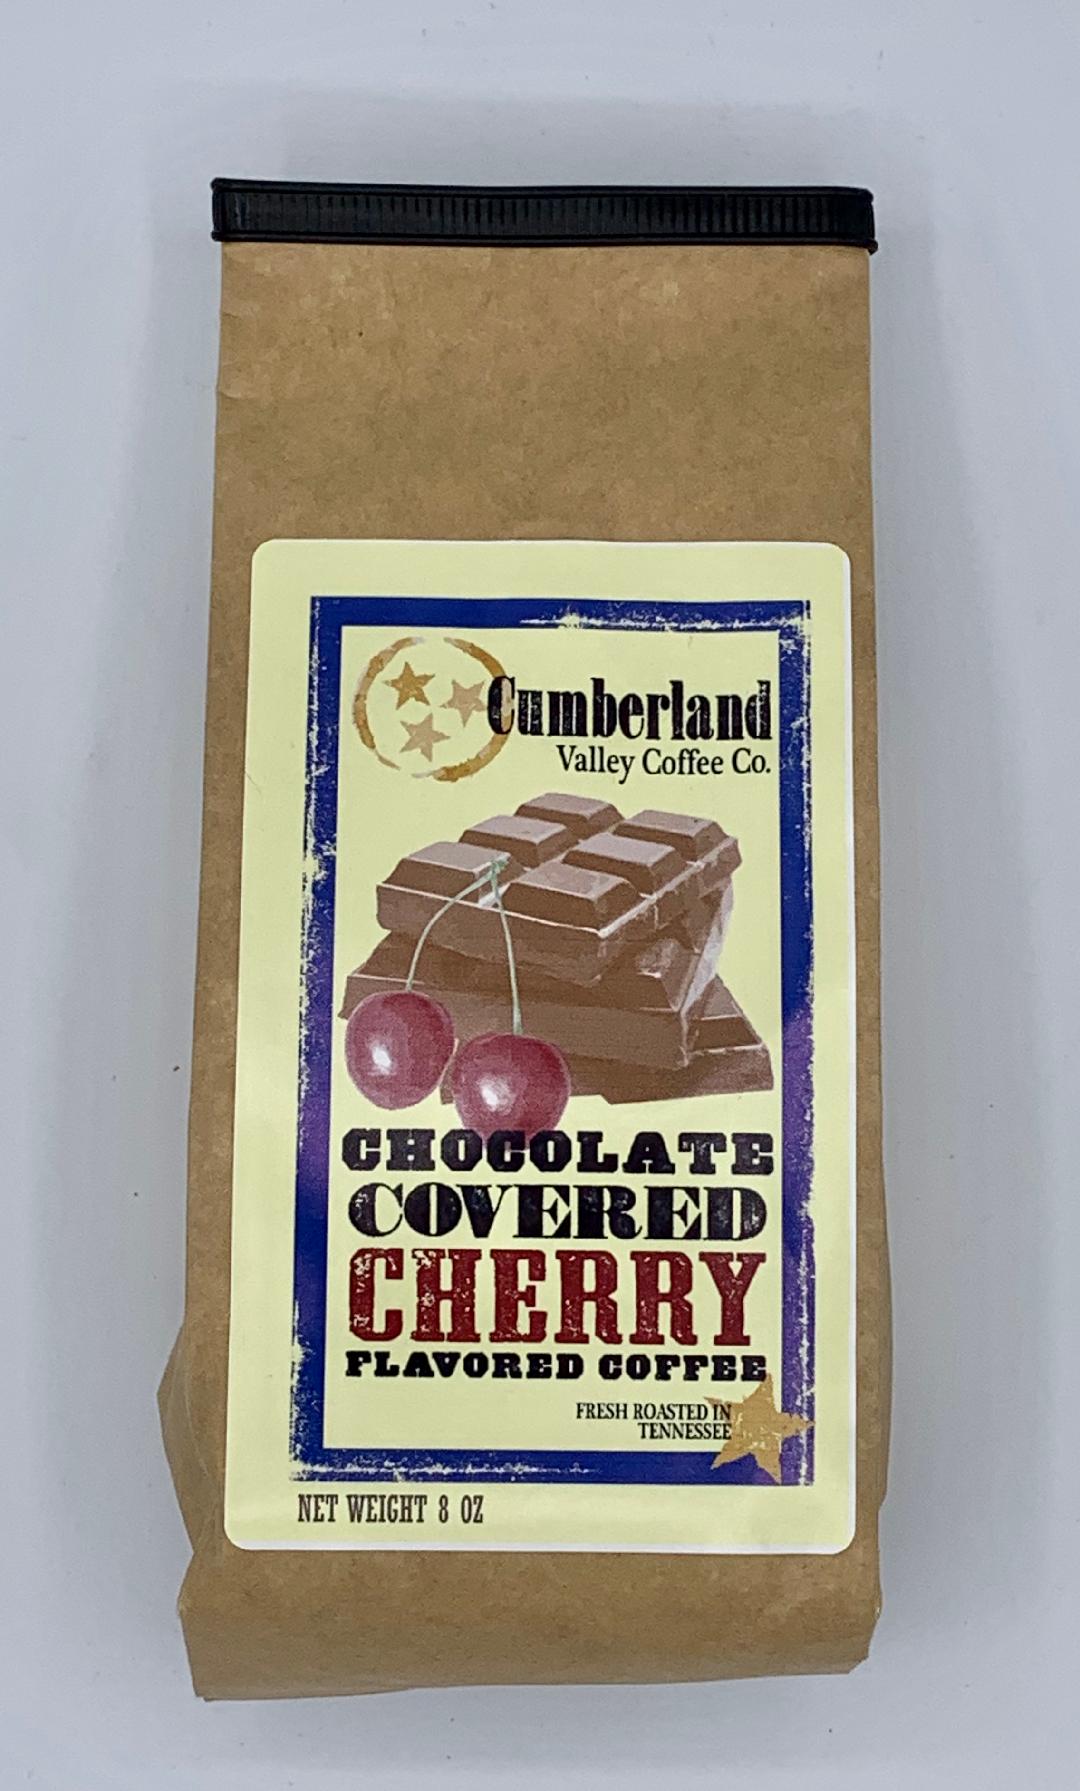 Chocolate Covered Cherry Flavored Coffee